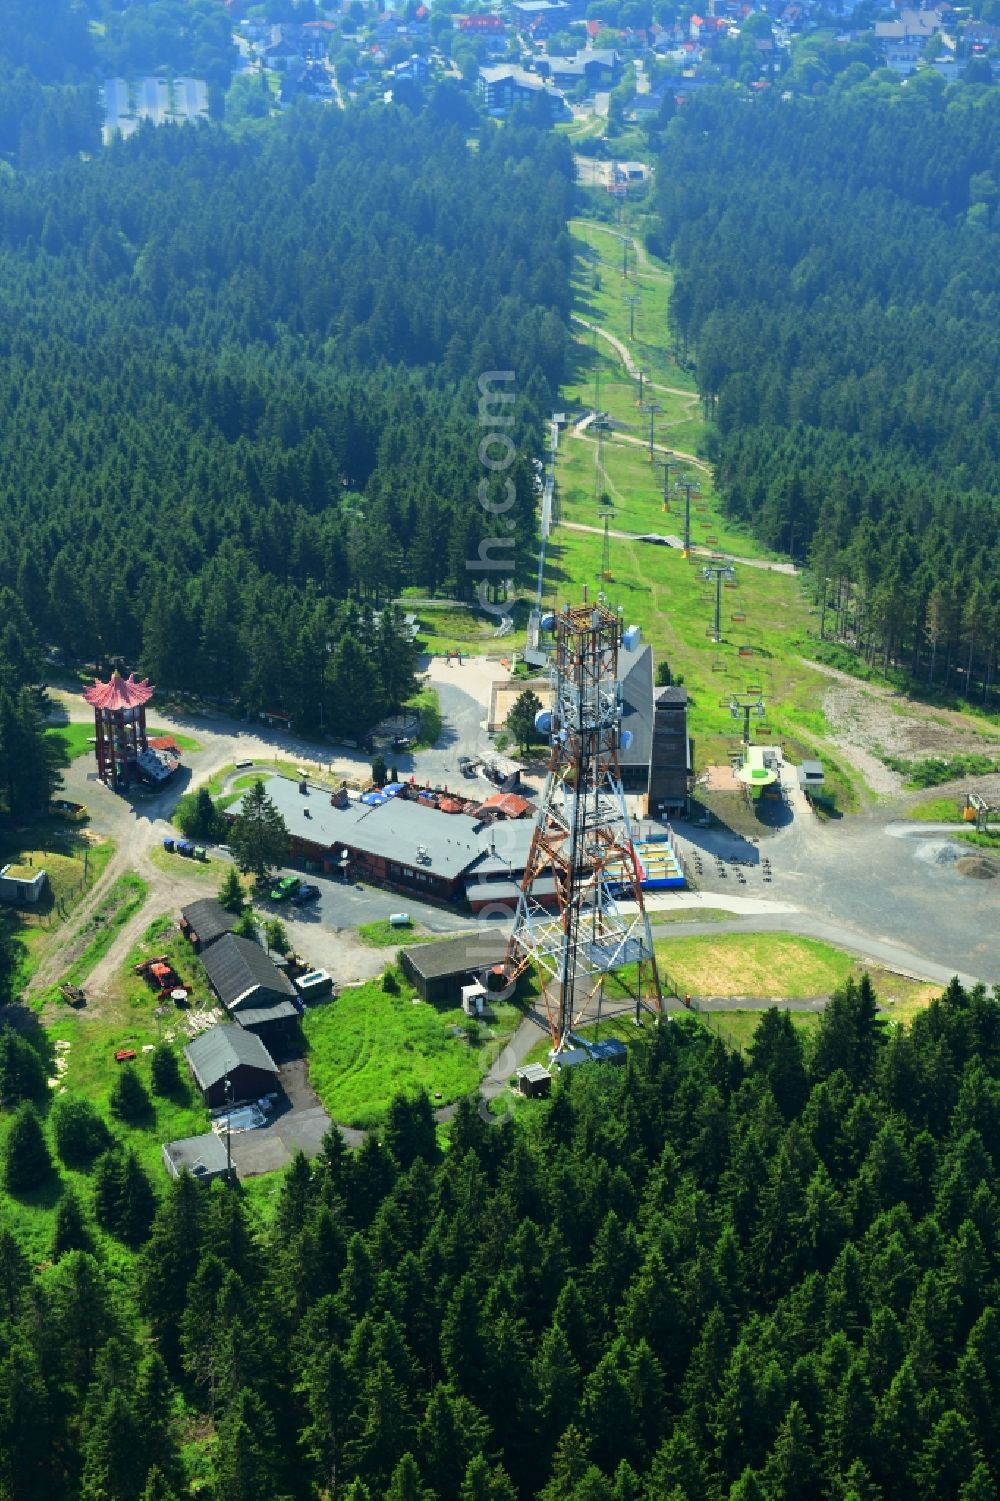 Aerial image Hahnenklee - Mountain slope with downhill ski slope and cable car - lift on Bocksberg in Hahnenklee in the state Lower Saxony, Germany